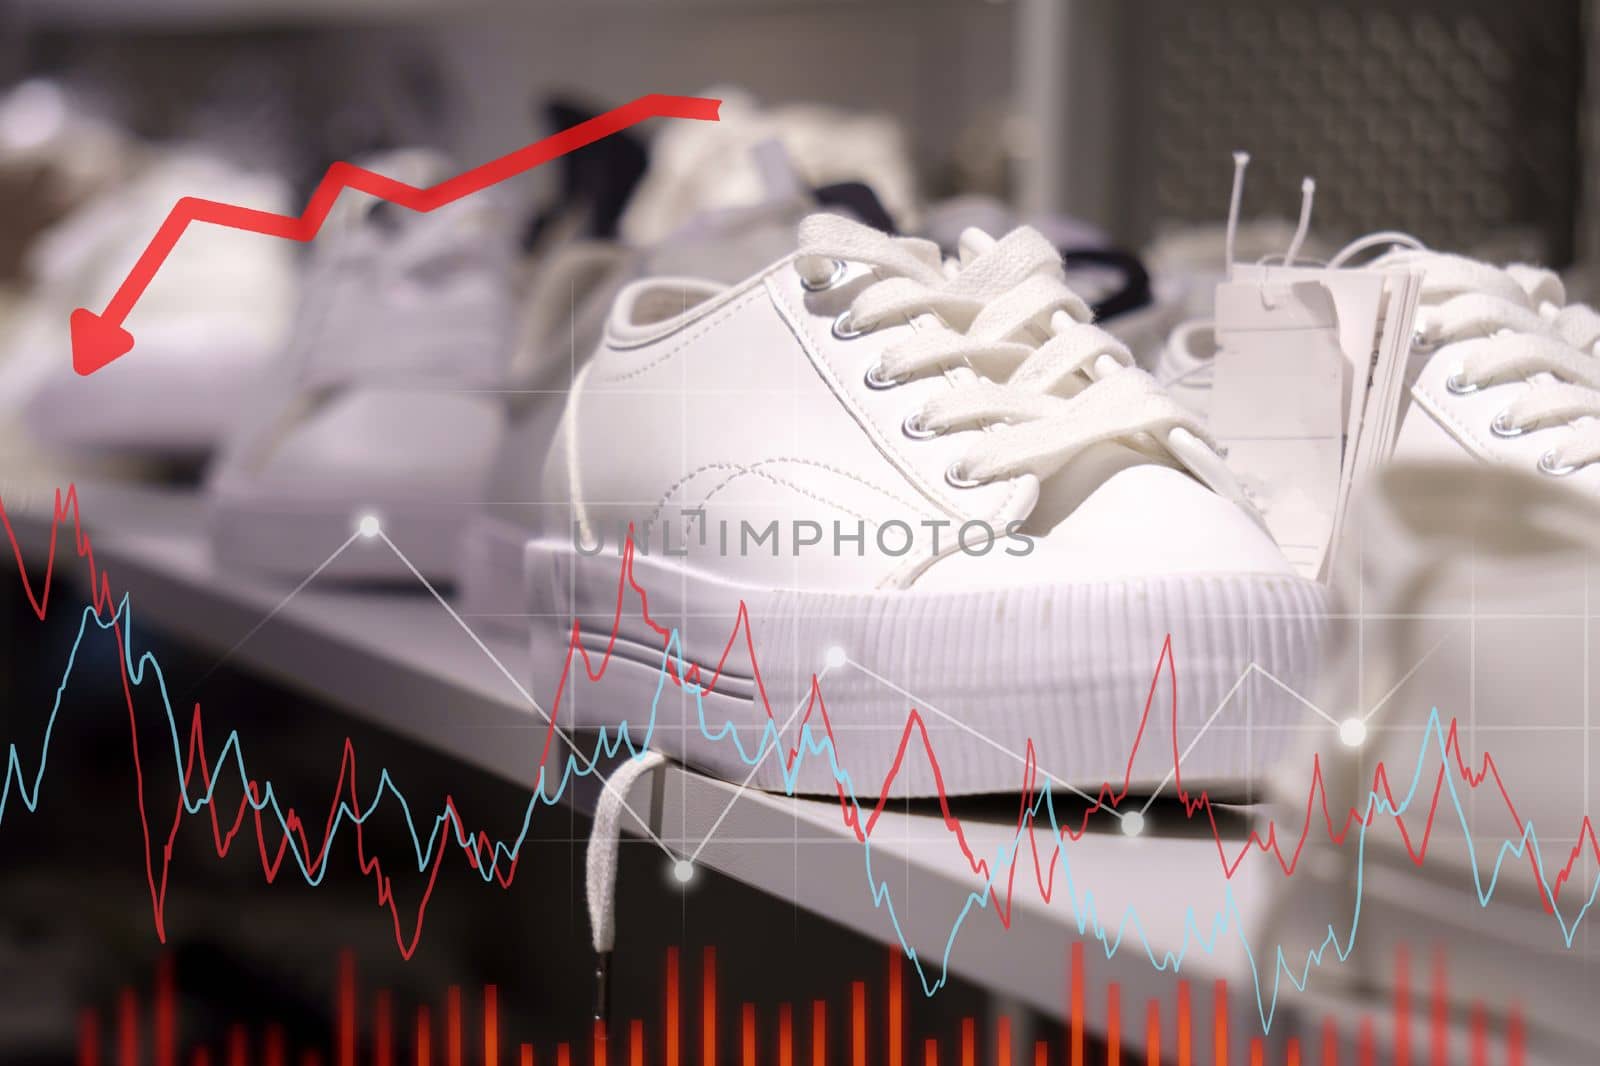 Sale concept shoes, white sneakers. Sale schedule, down arrow. Buying shoes